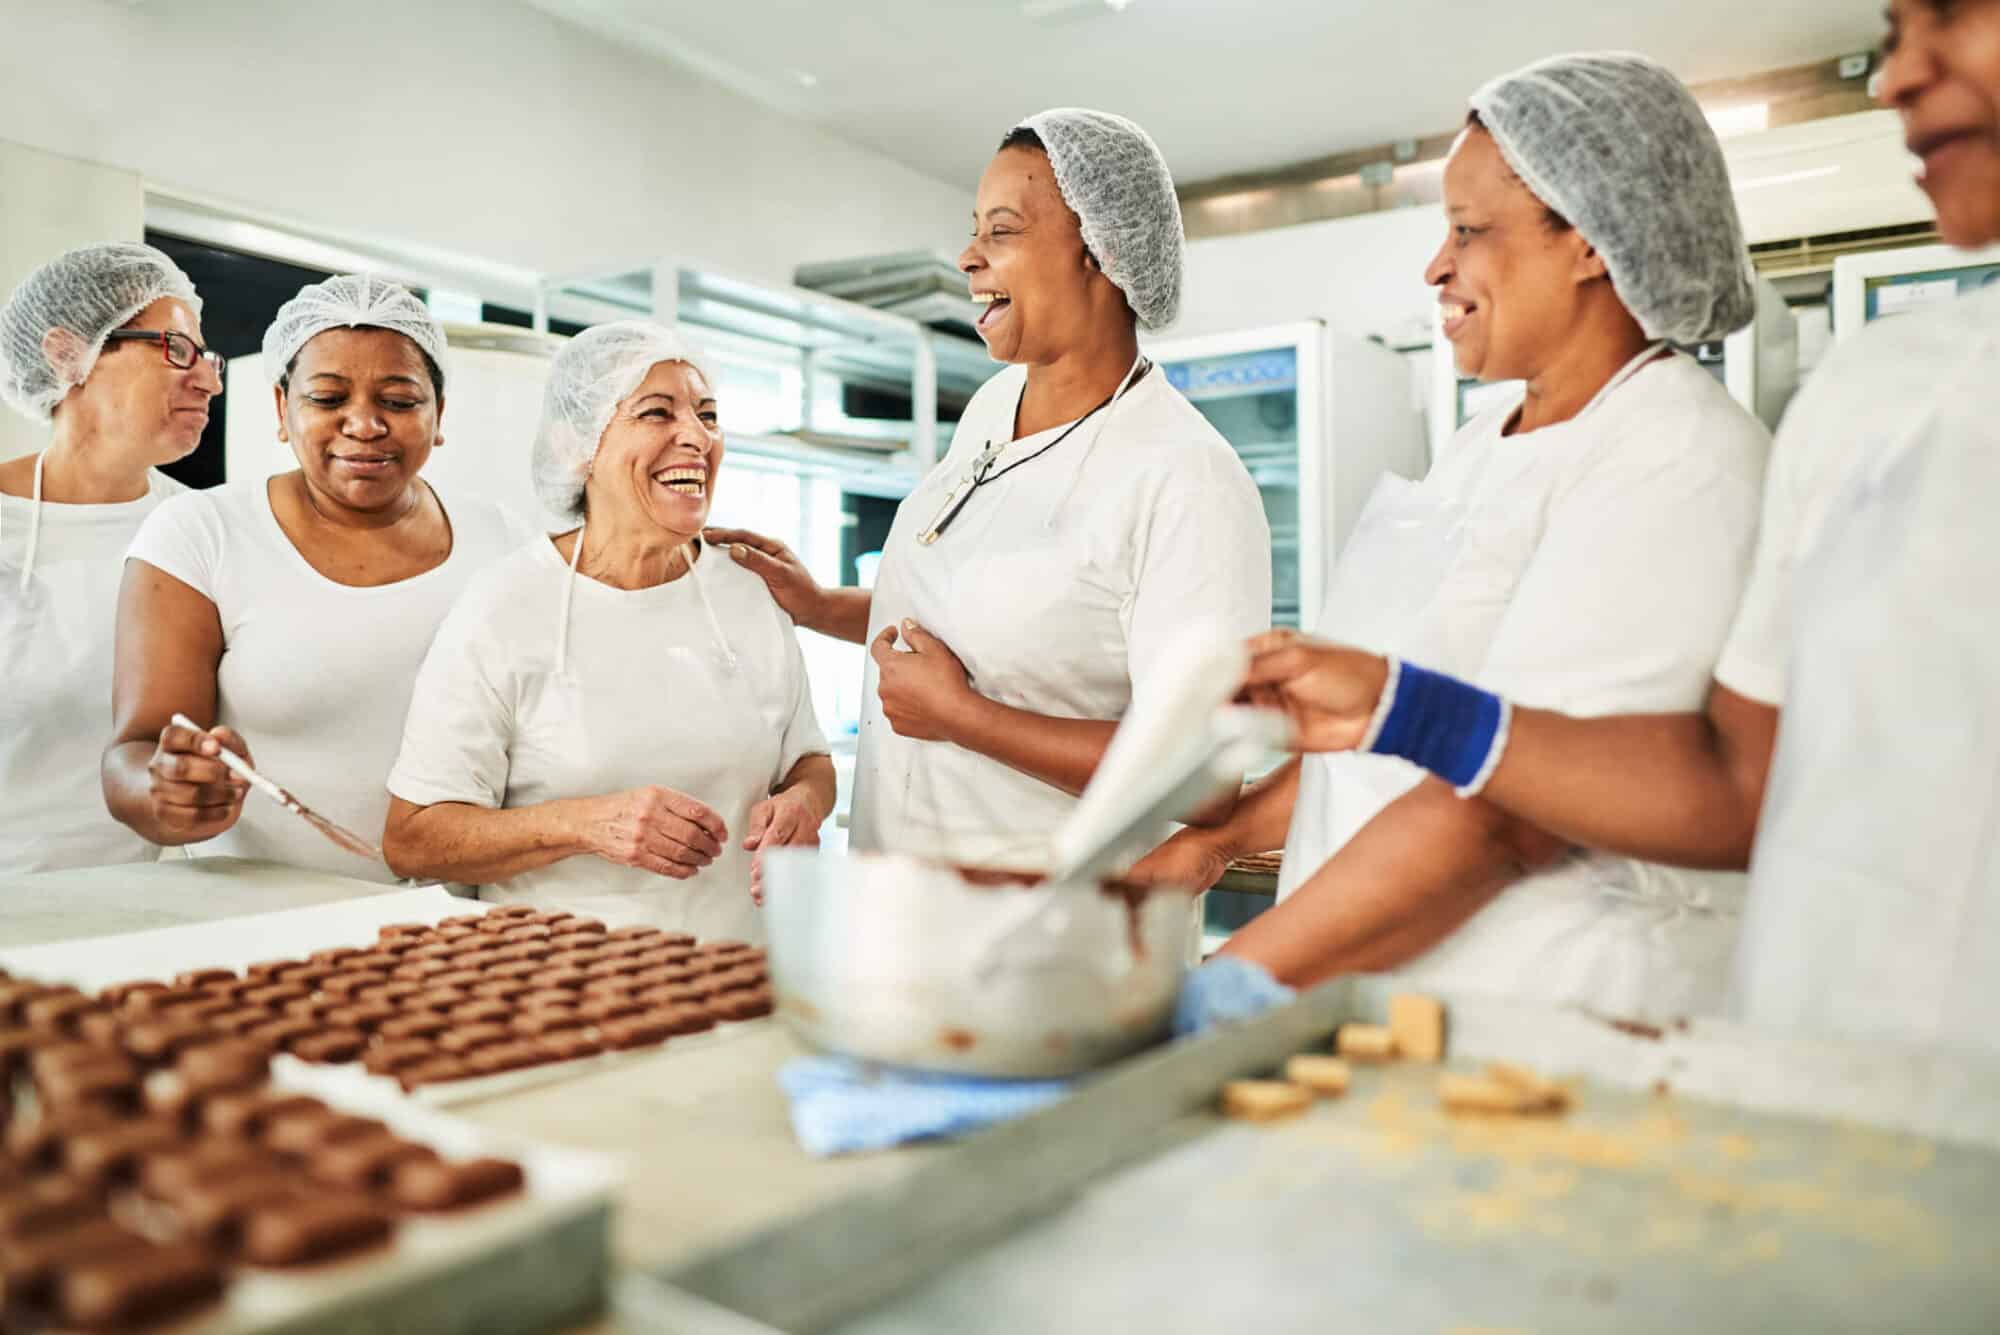 Six women in white clothing and protective hair nets standing around a table laughing while preparing chocolate.